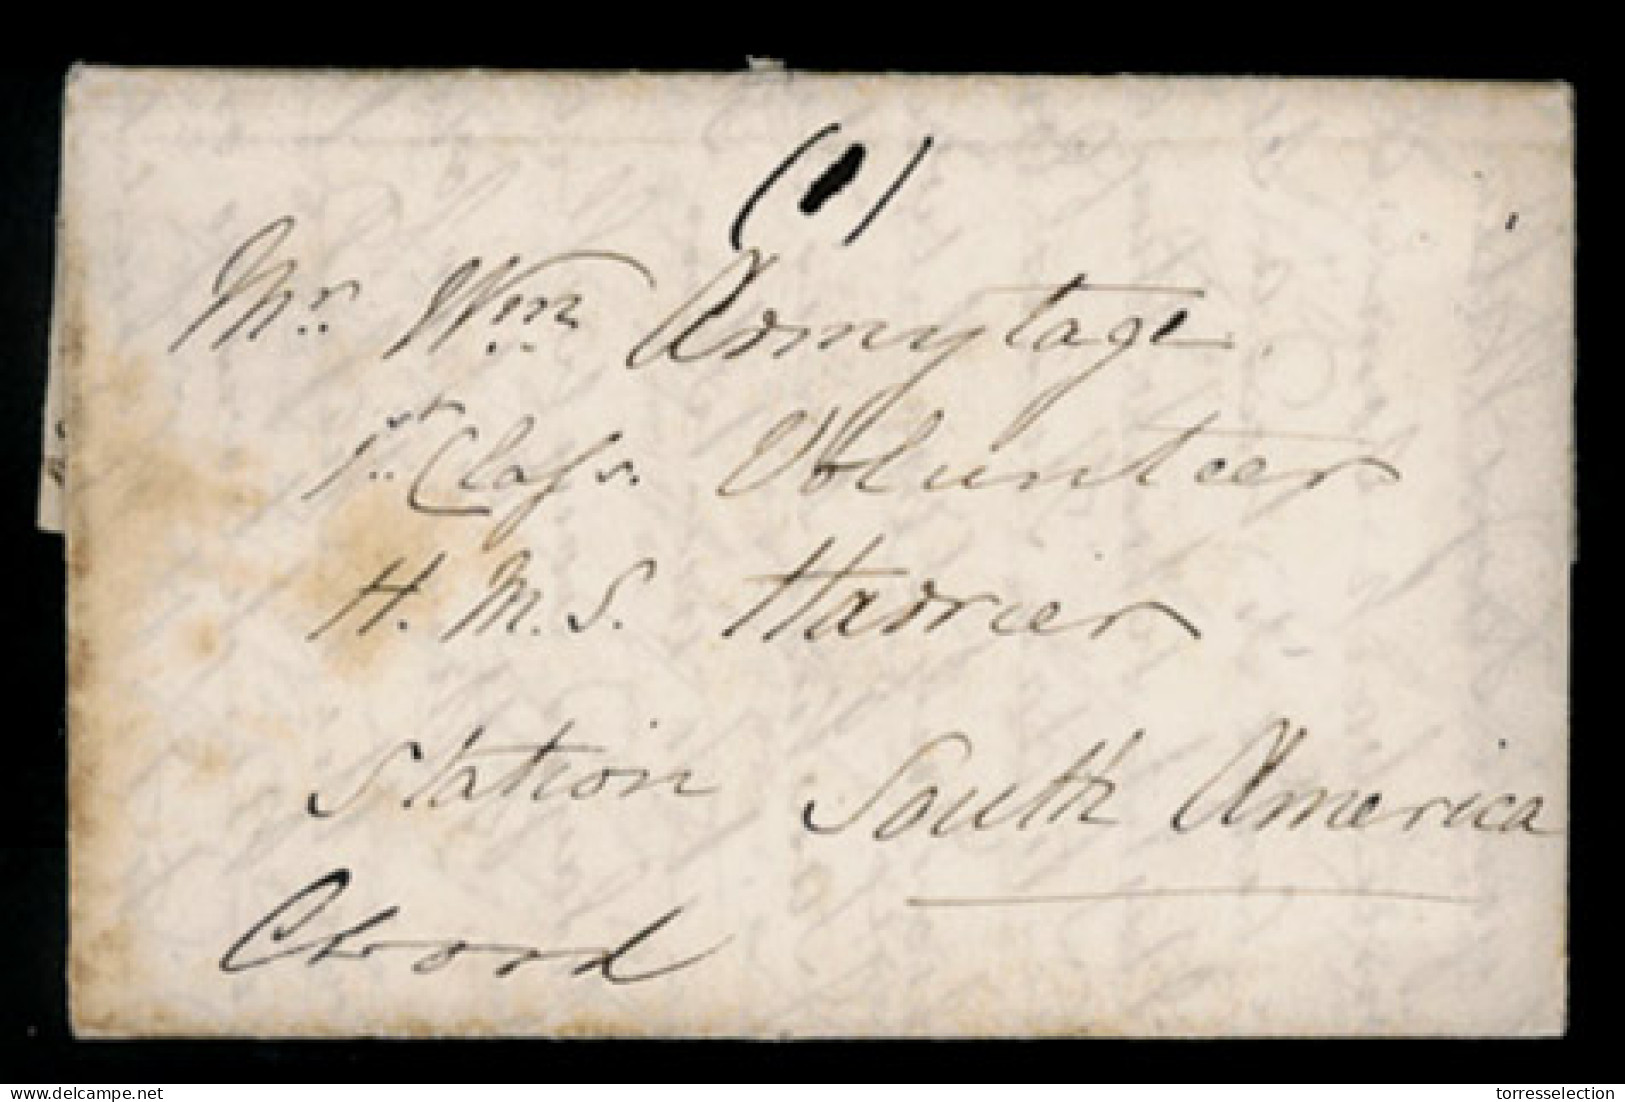 GREAT BRITAIN. GB-SOUTH AMERICA. 1835, Dec.28th. Entire Letter With Manuscript "Closed" And Sent Under Cover Outside The - ...-1840 Prephilately